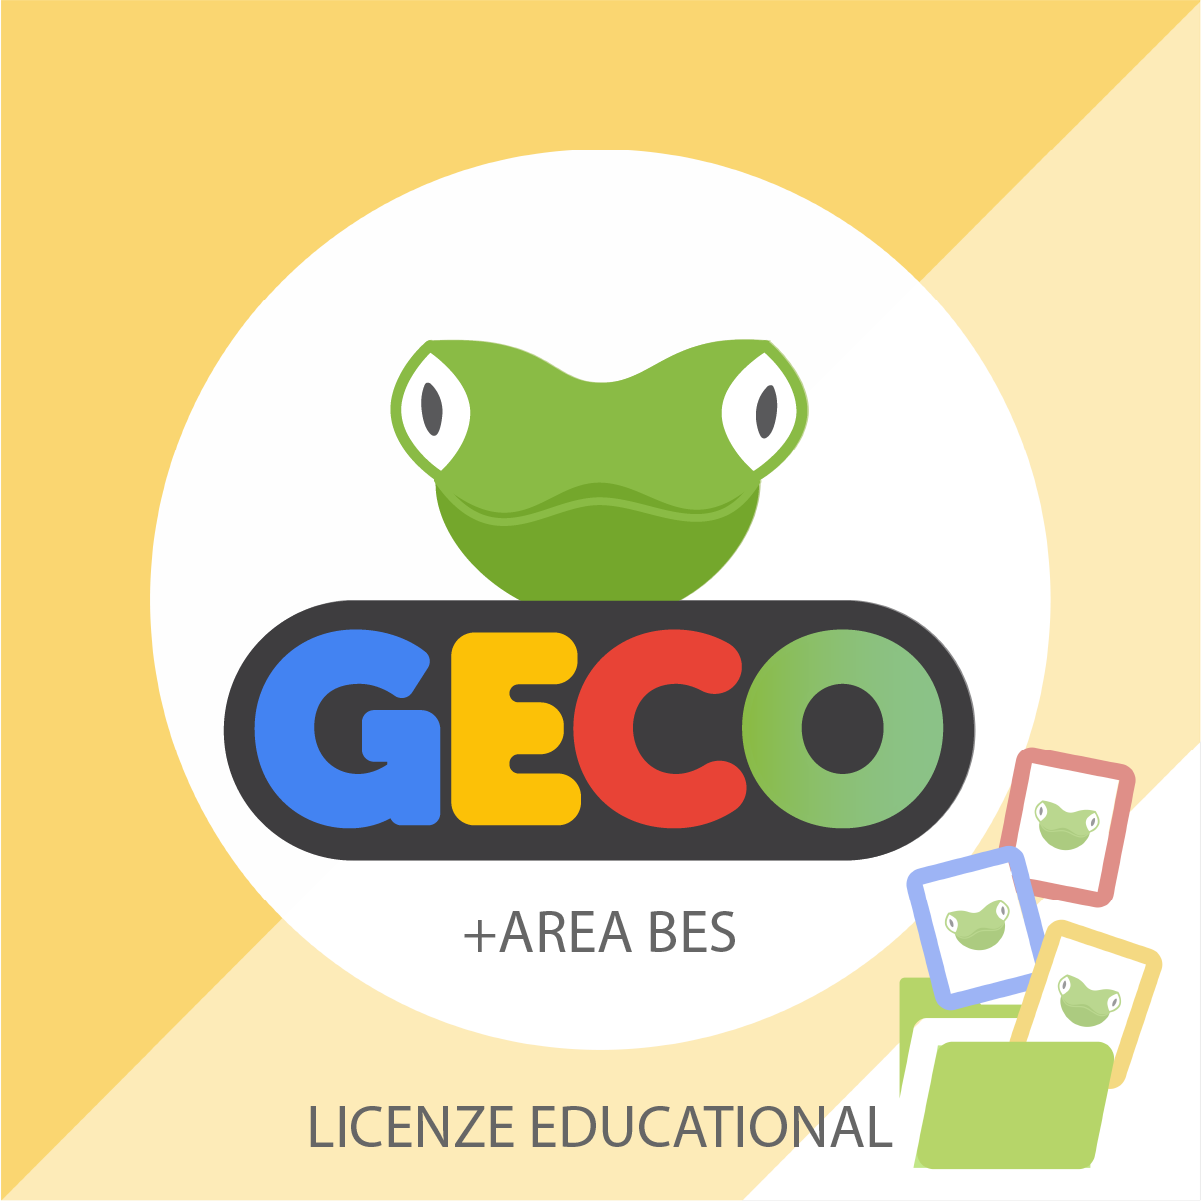 GECO BES Licenze educational